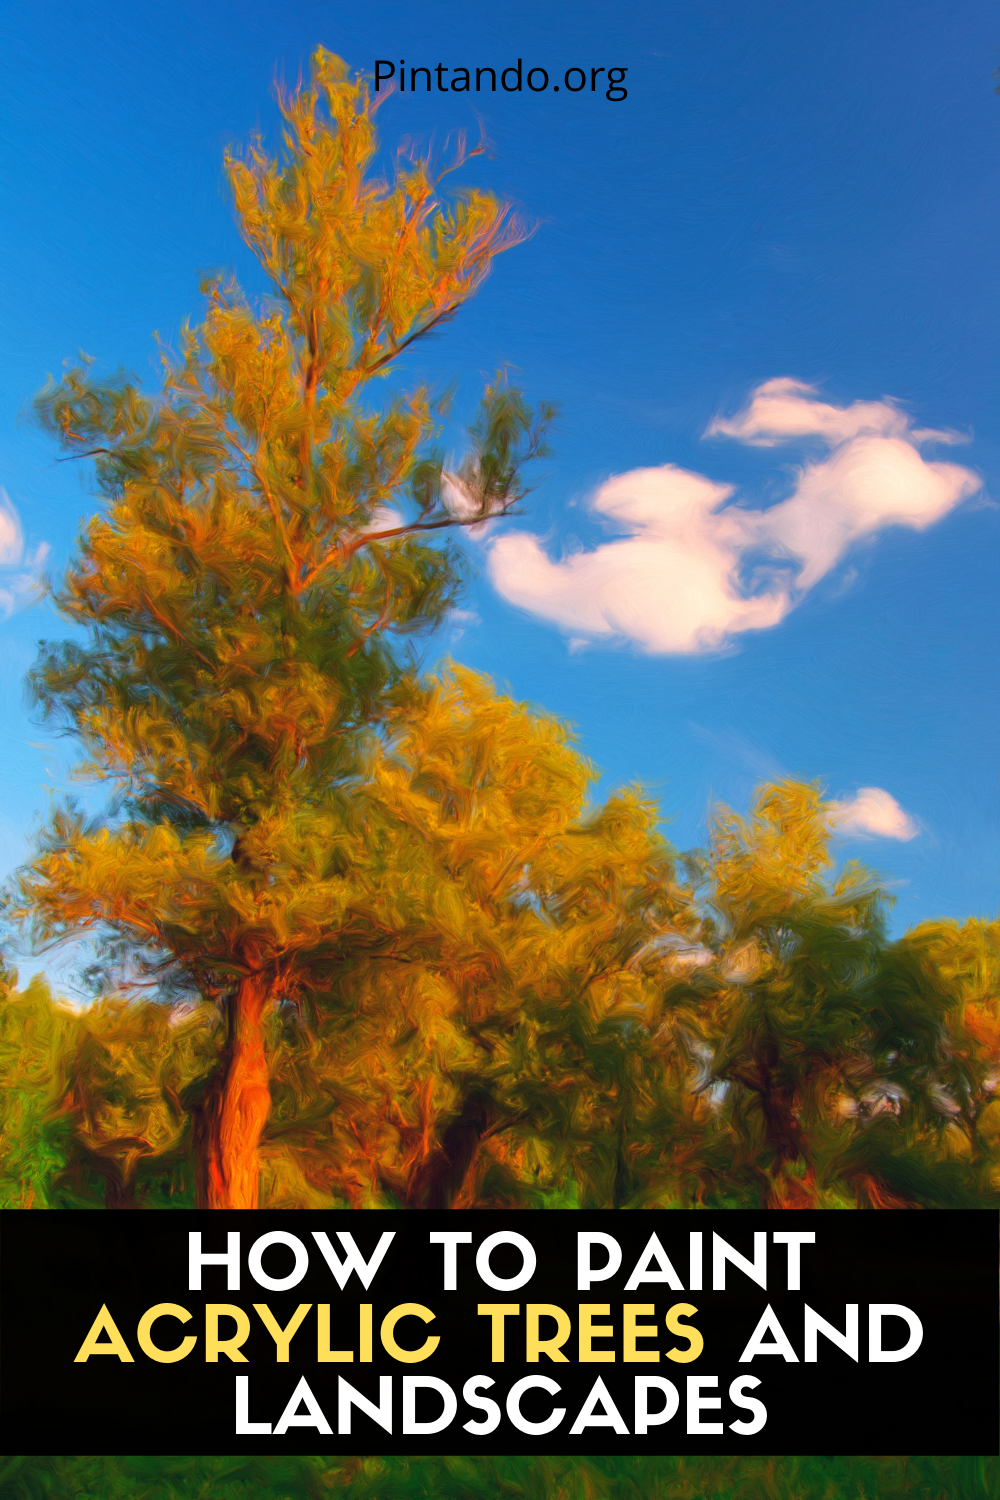 HOW TO PAINT ACRYLIC TREES AND LANDSCAPES (1)